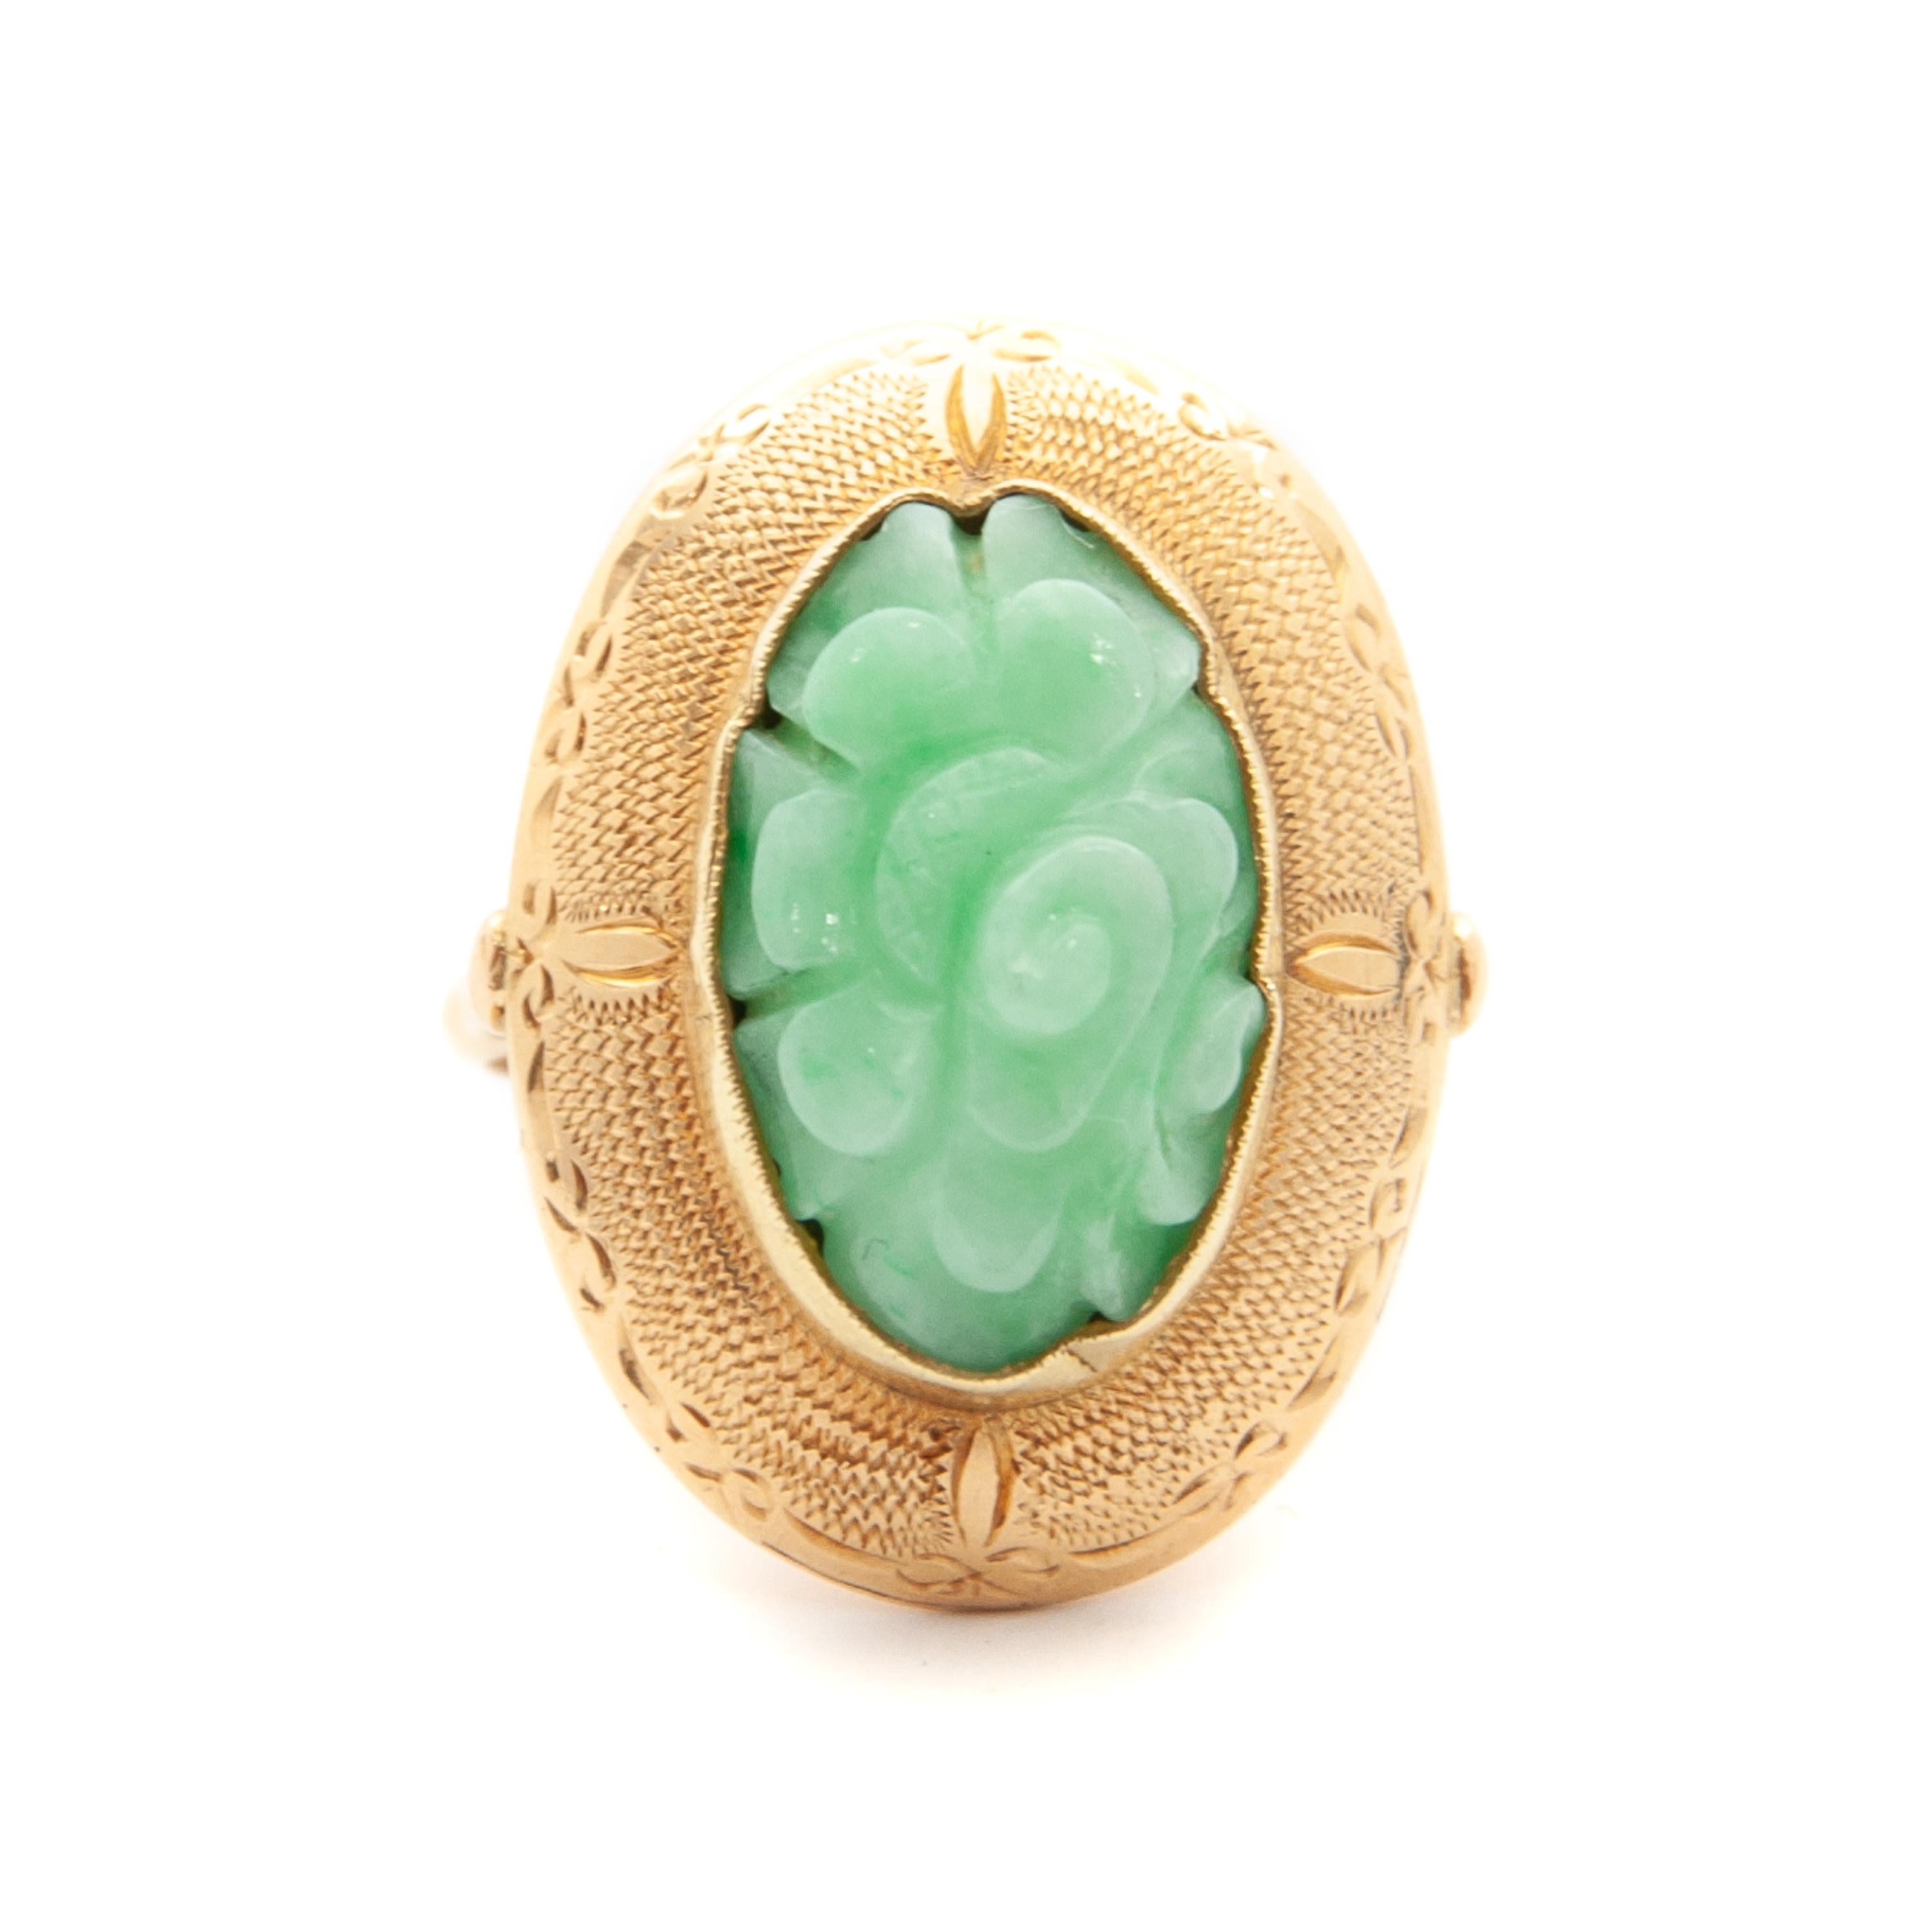 This beautiful vintage oval-shaped 14 karat gold ring is set with a floral carved apple green jade stone. The gold of this beautiful jade ring is accentuated by a matte satin etched design. The gold frame is very nicely decorated with a raised edge